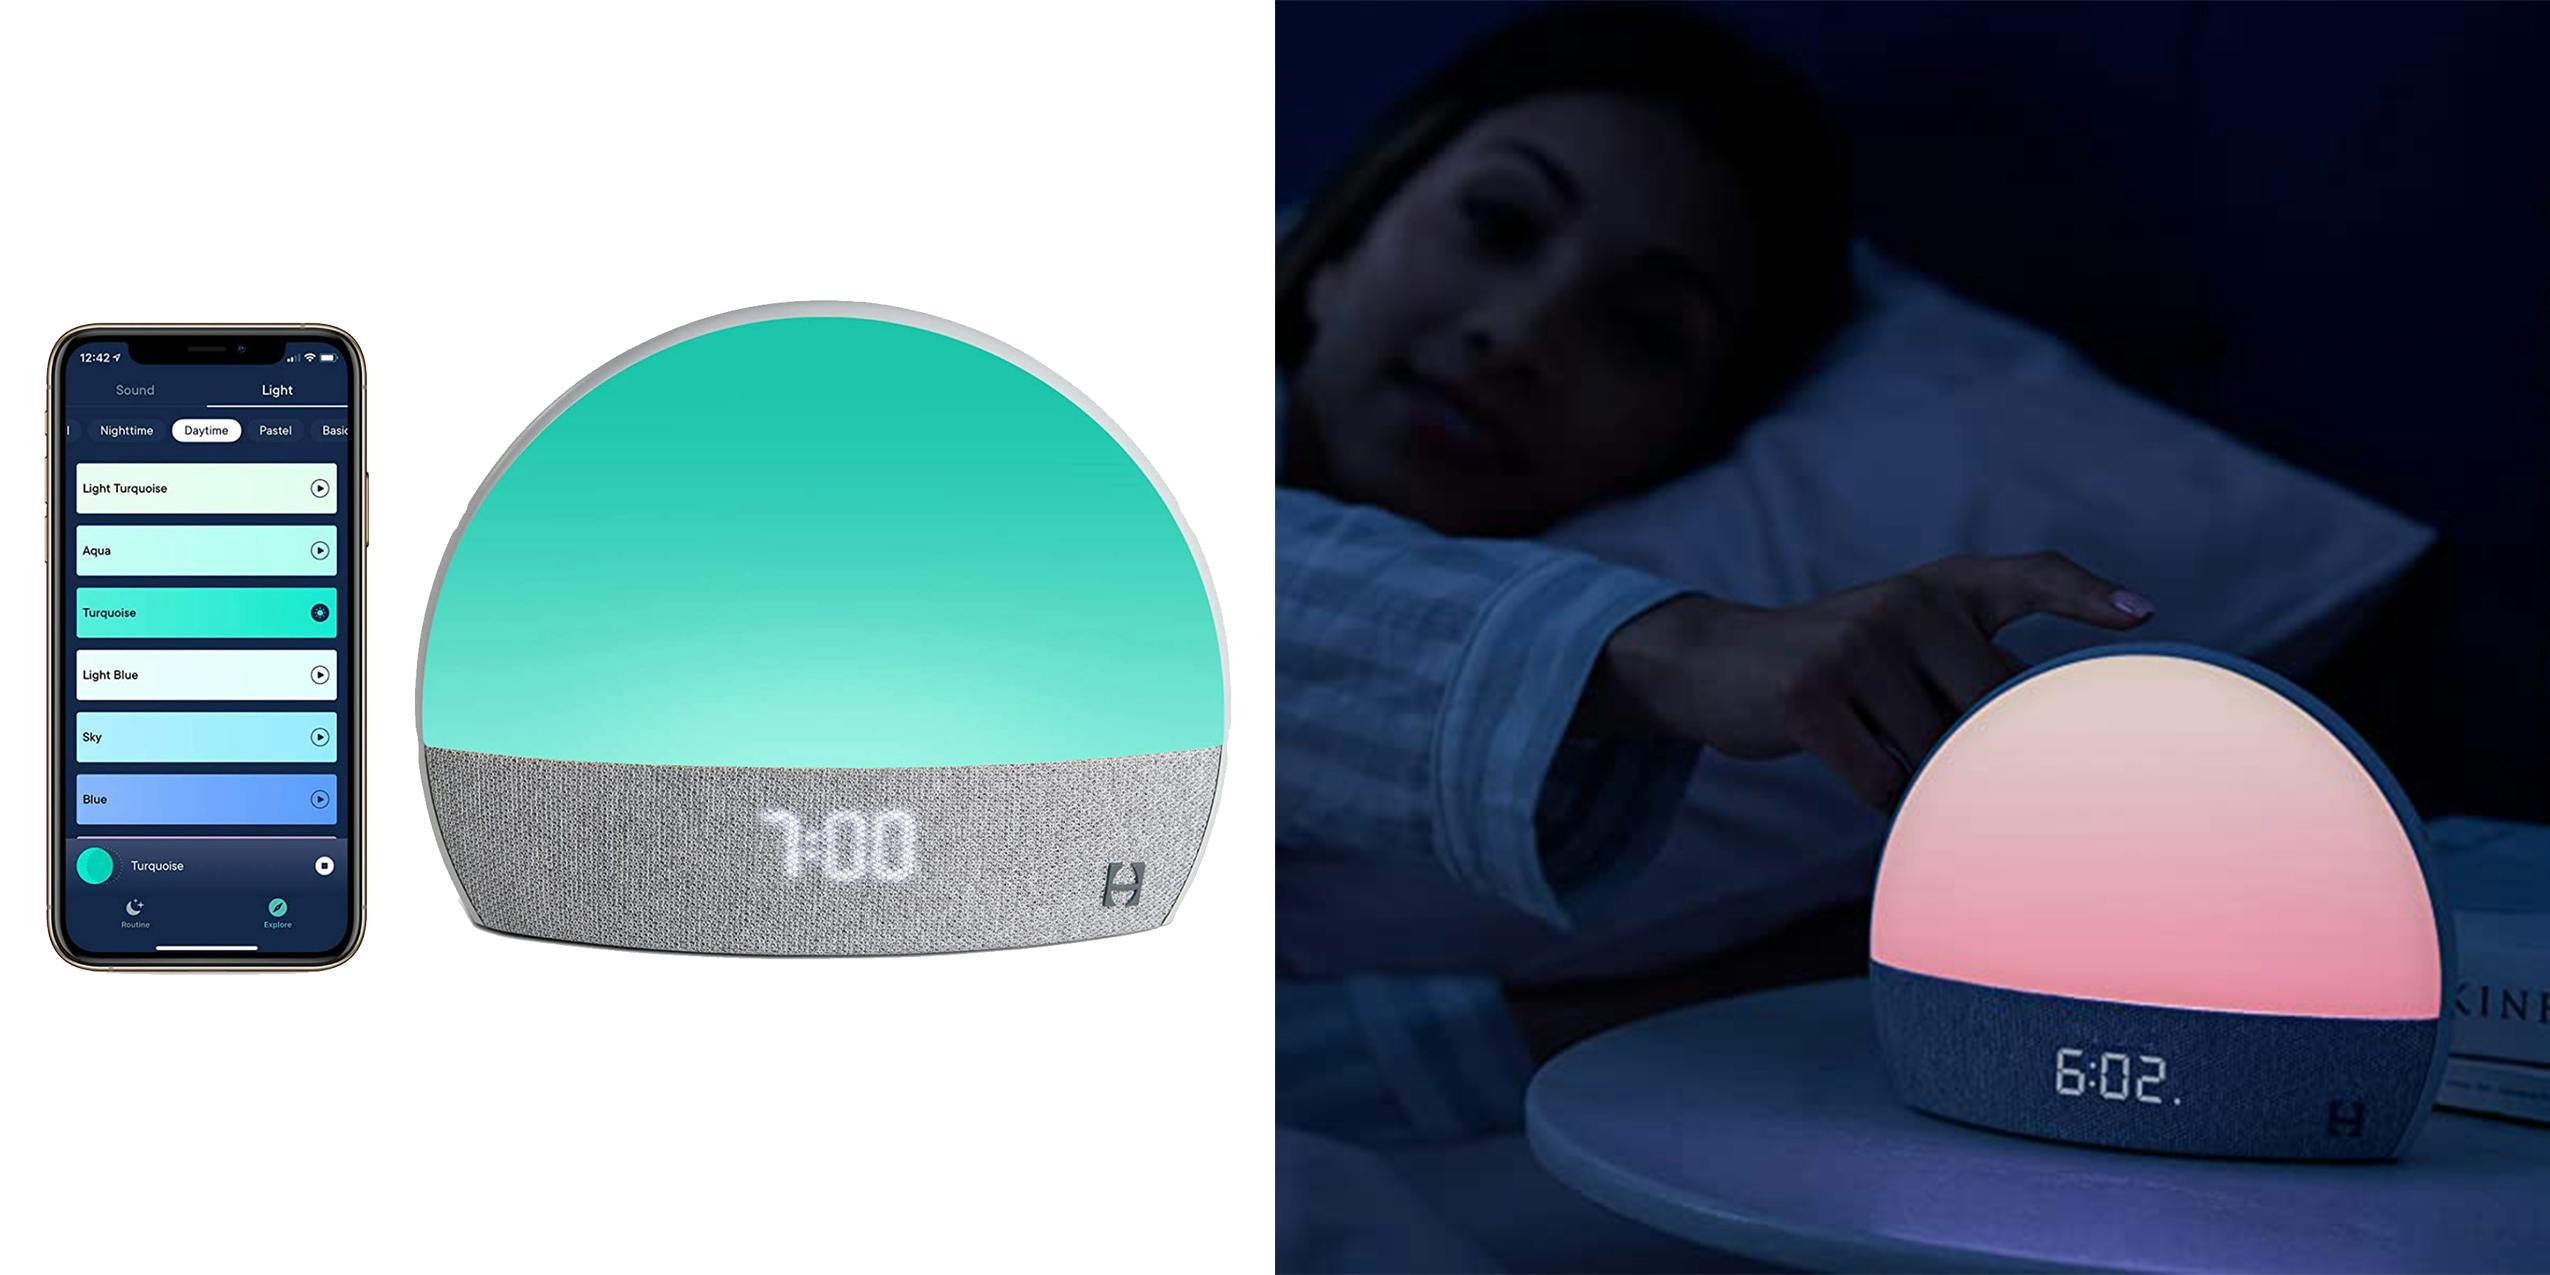 The Hatch Restore sleep device and its app make a great self-care gift.